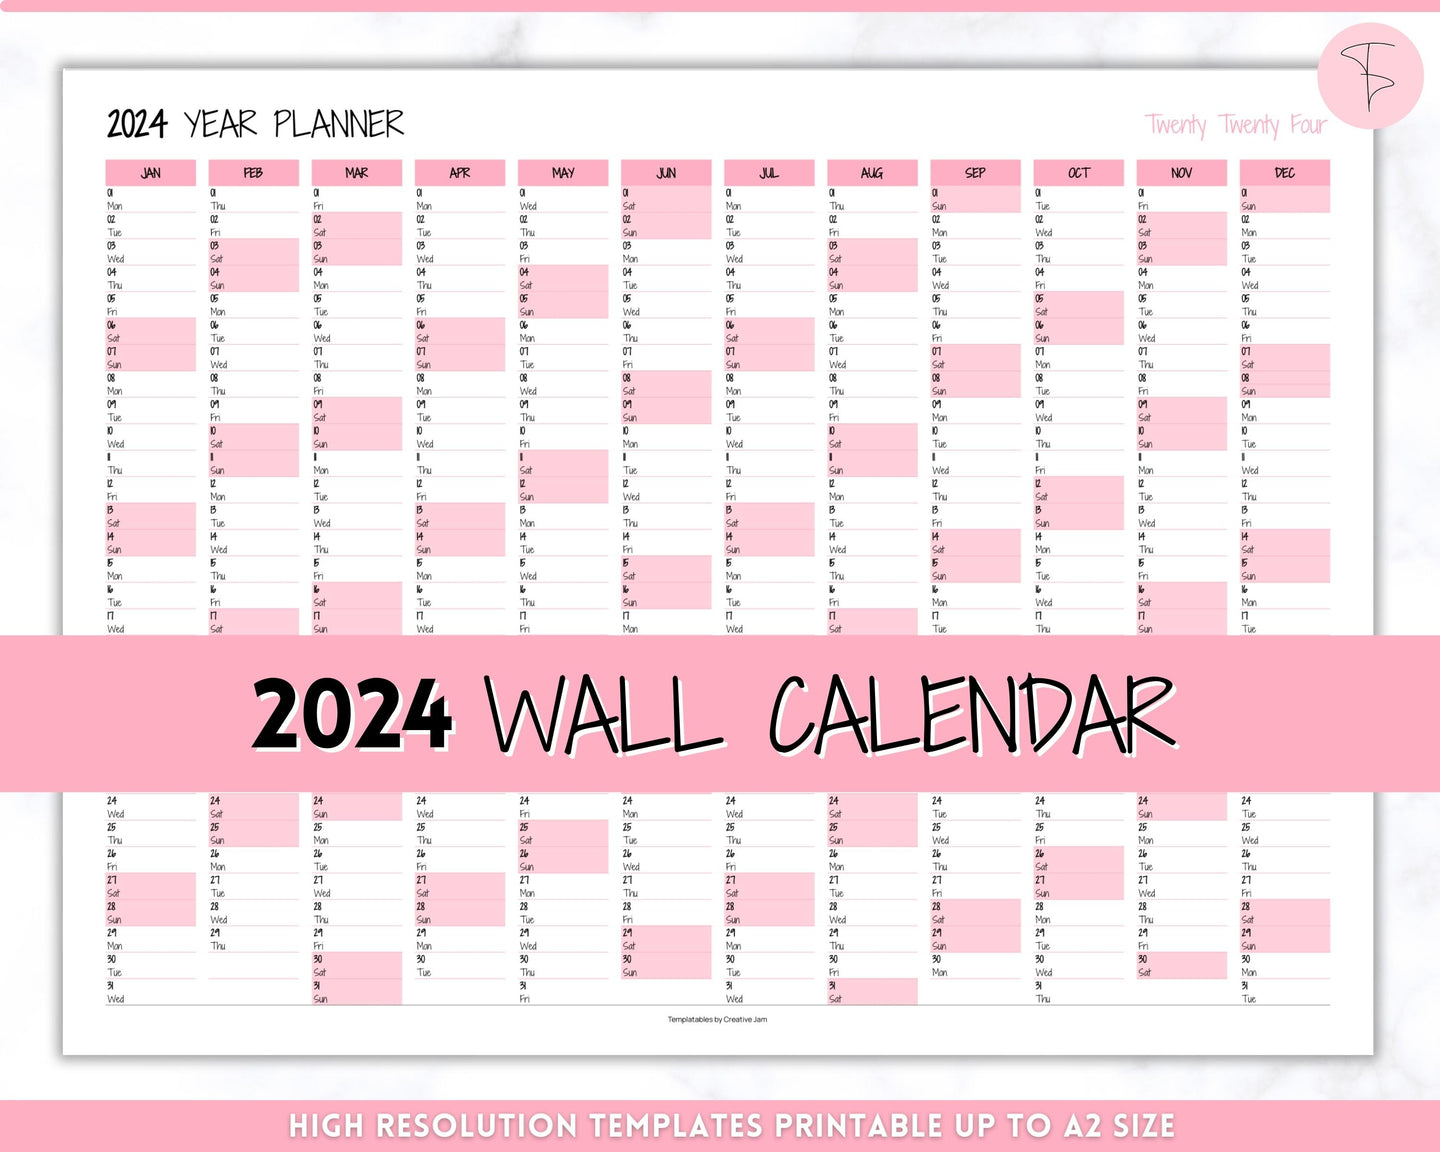 2024 Wall Calendar Printable | Large Yearly 12 Month Calendar | Annual Year at a glance | Pink